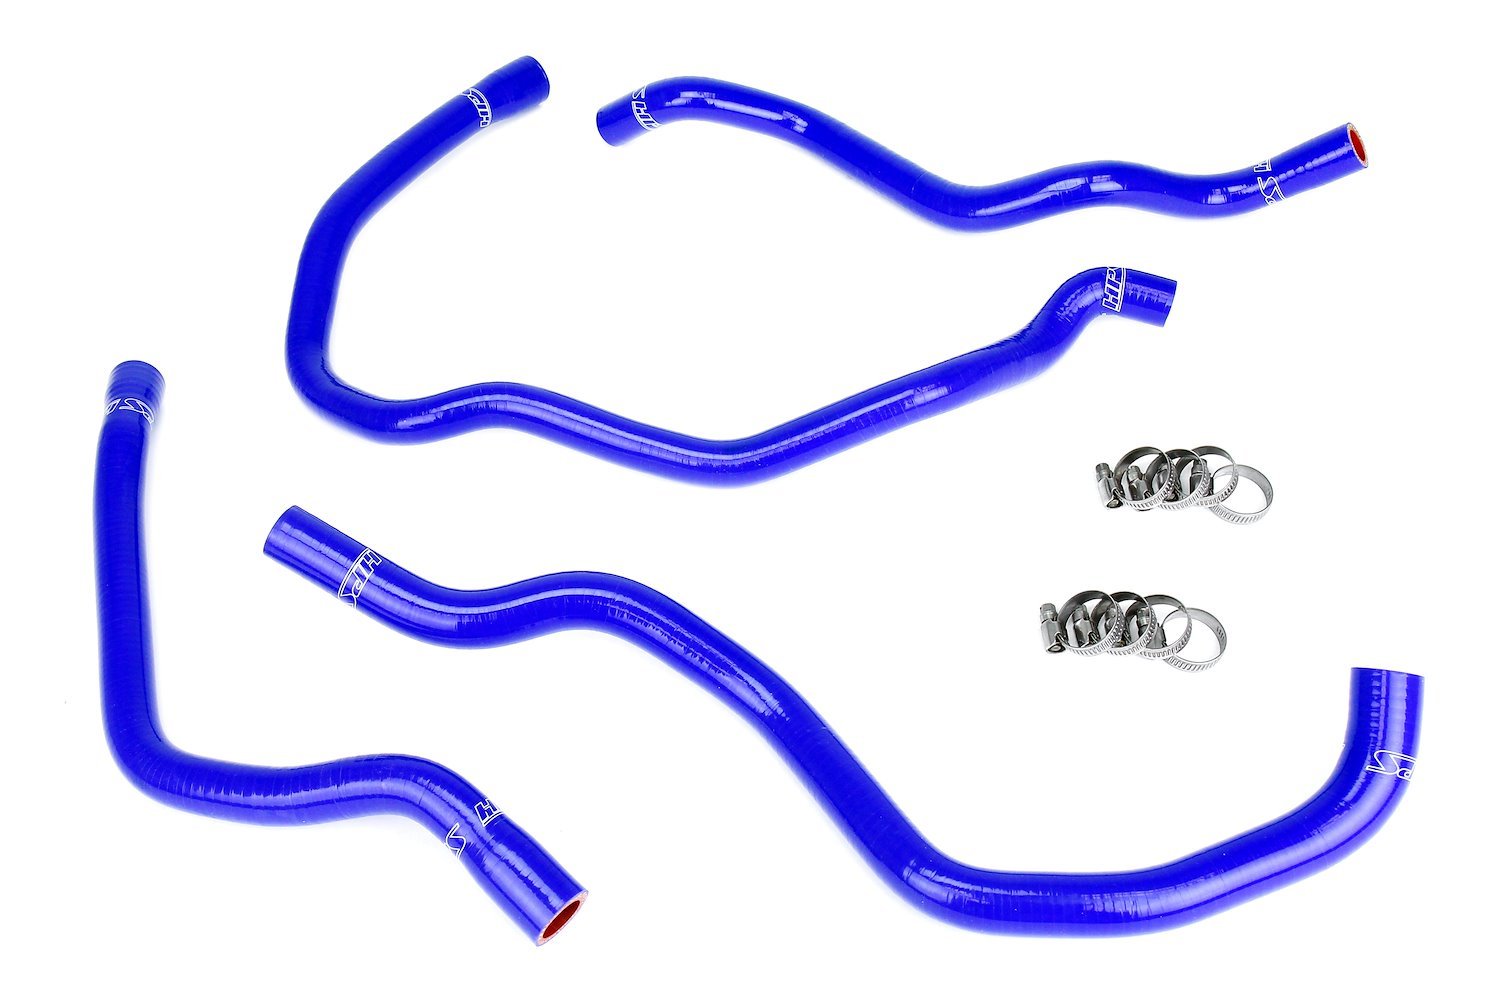 57-1937-BLUE Heater Hose Kit, 3-Ply Reinforced Silicone, Replaces OEM Rubber Heater Coolant Hoses